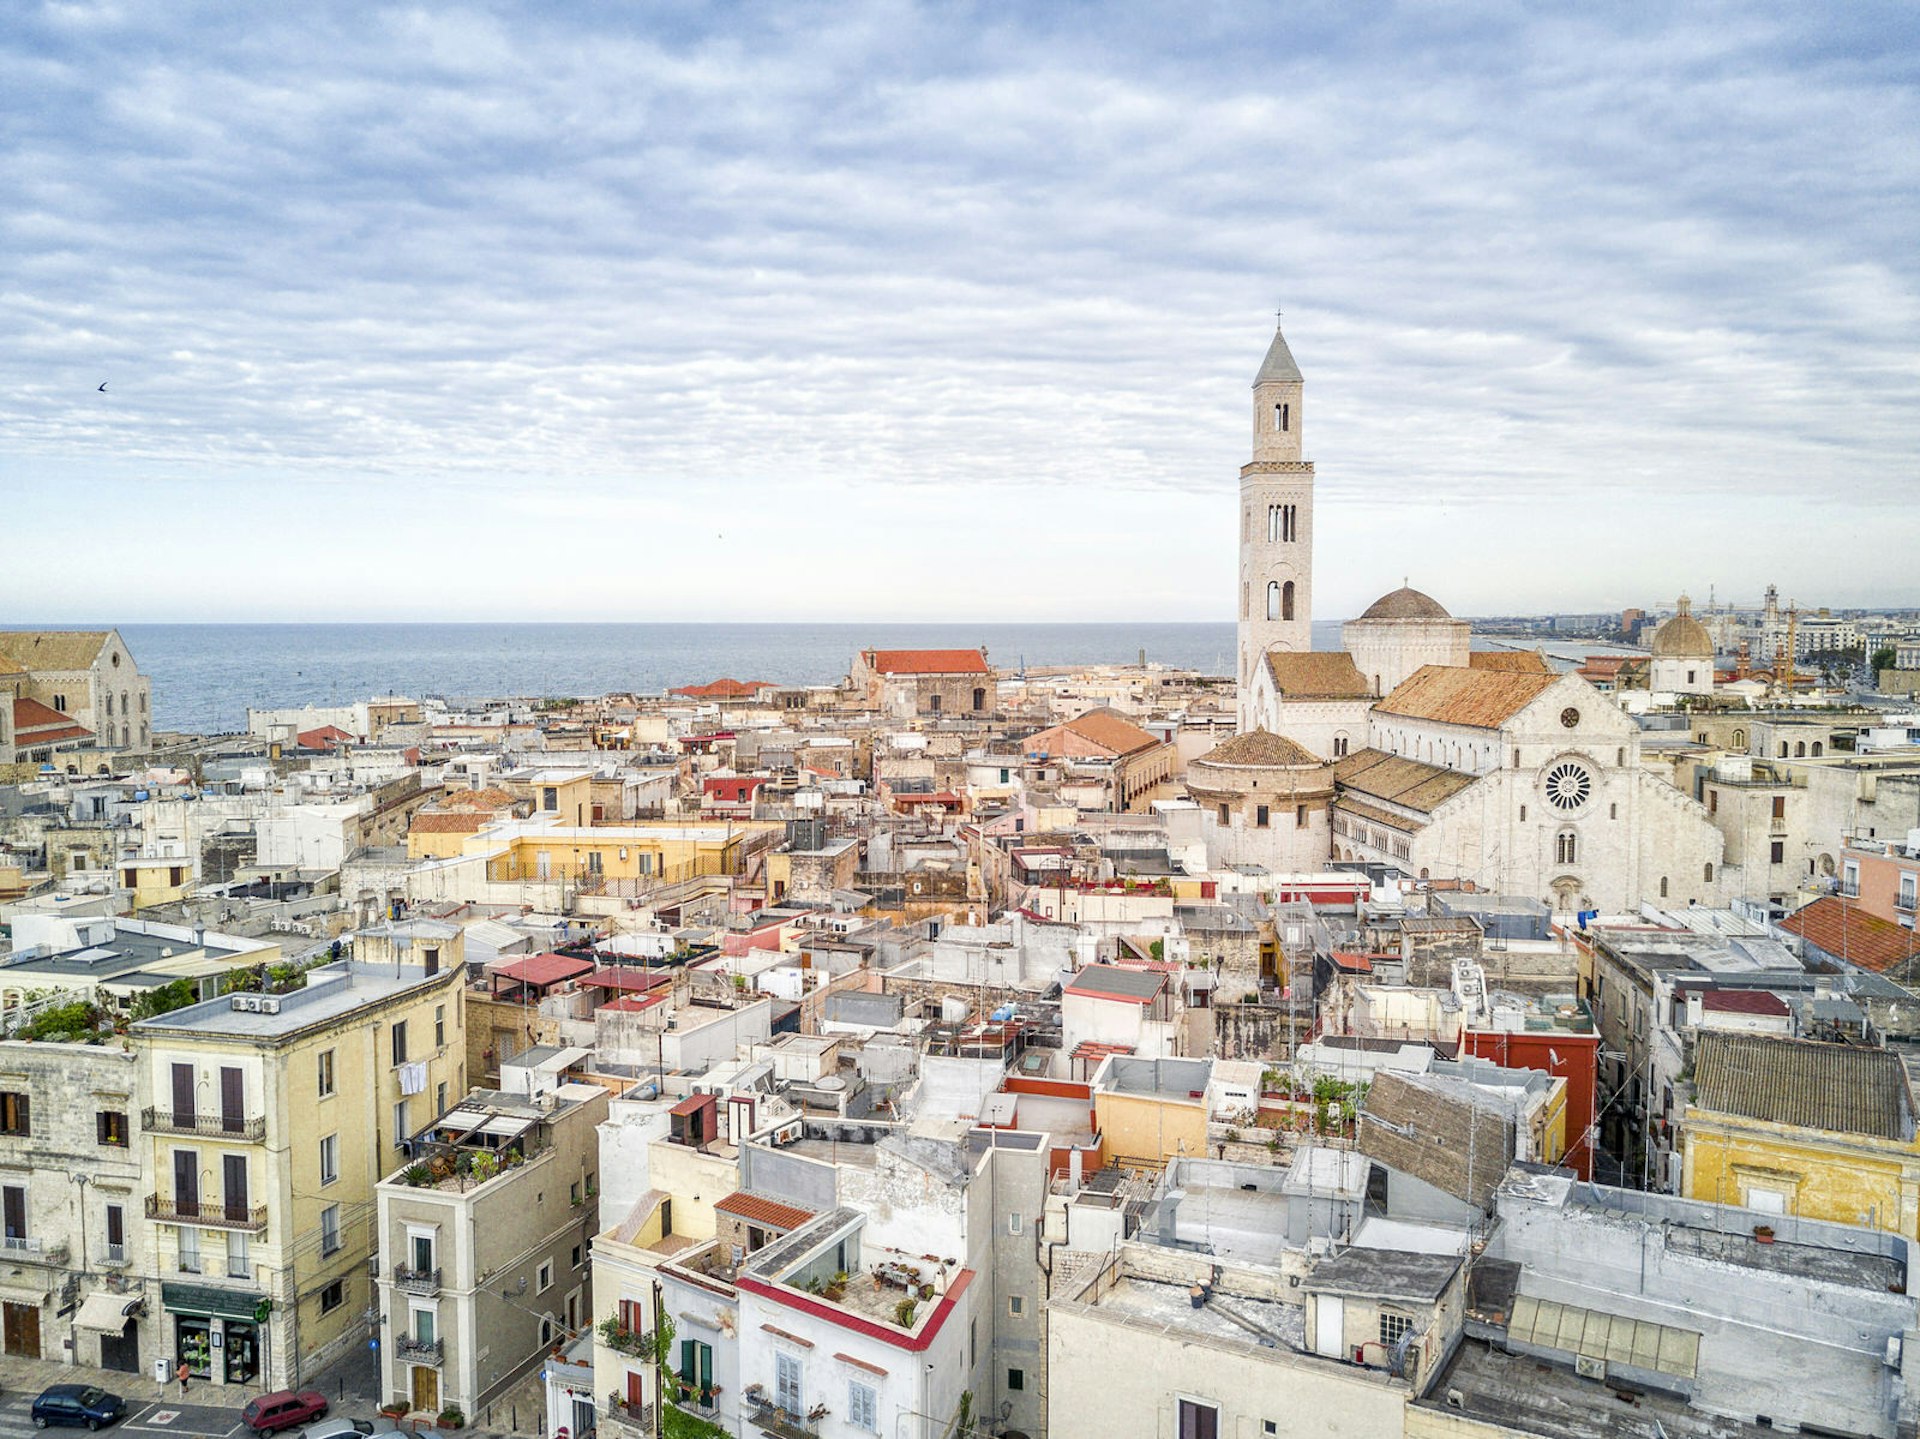 A view of the tightly packed buildings of Bari's Old Town, with Basilica di San Nicola on the right and the sea in the distance